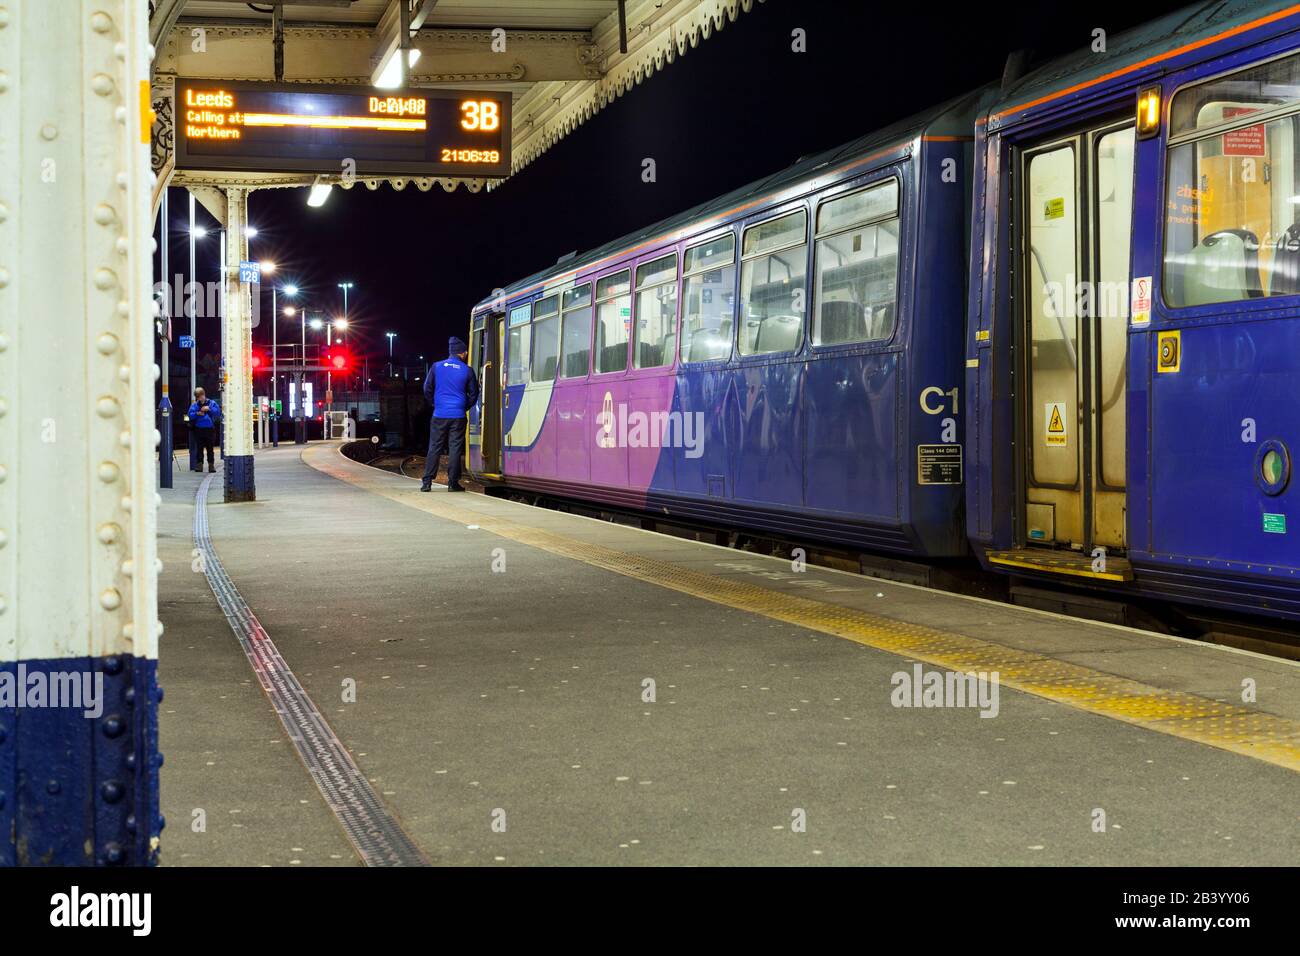 Northern rail class 144 pacer train 144006 at Sheffield railway station waiting to depart Stock Photo